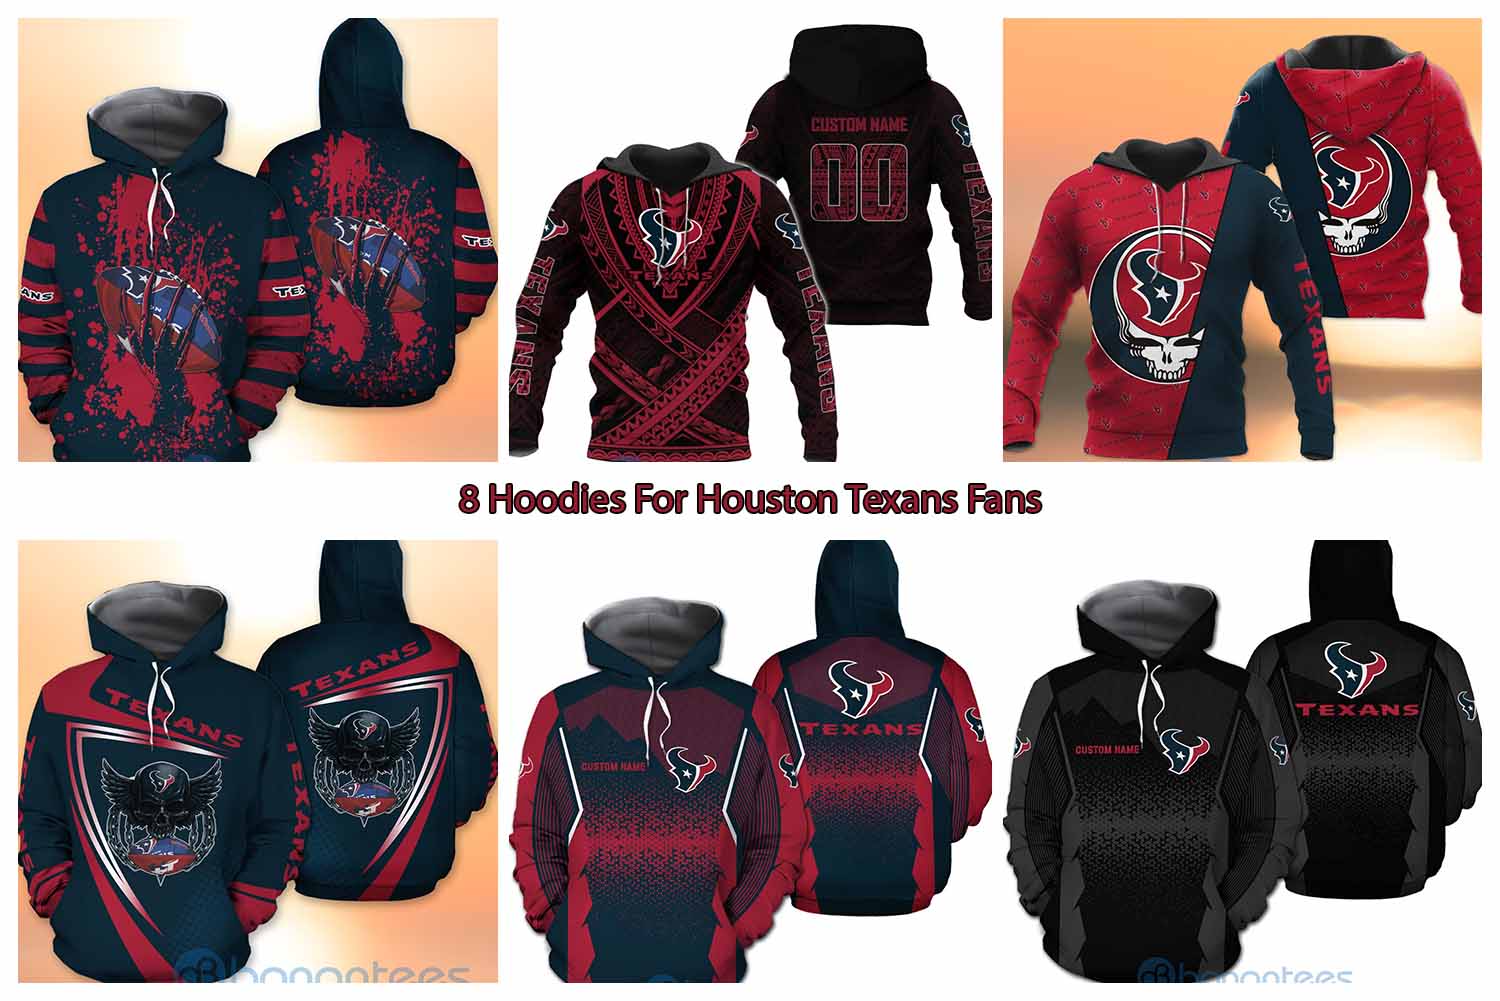 8 Hoodies For Houston Texans Fans